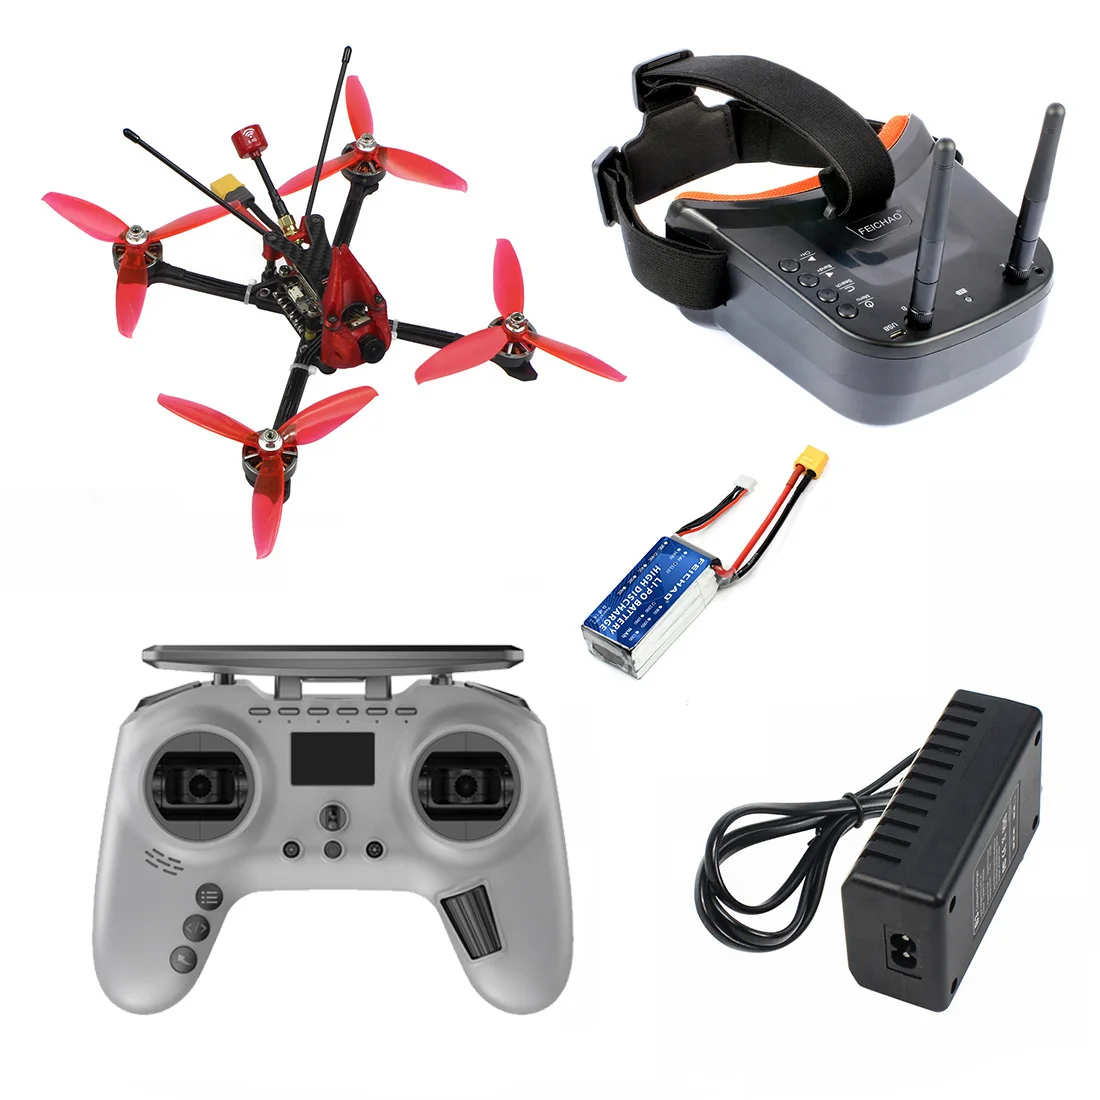 

DIY Ti210 210mm 5inch FPV Drone 3-4S With 1200TVL Camera 2306 2400KV Motor With Remote Control RC Quadcopter T-Lite TX Airplane